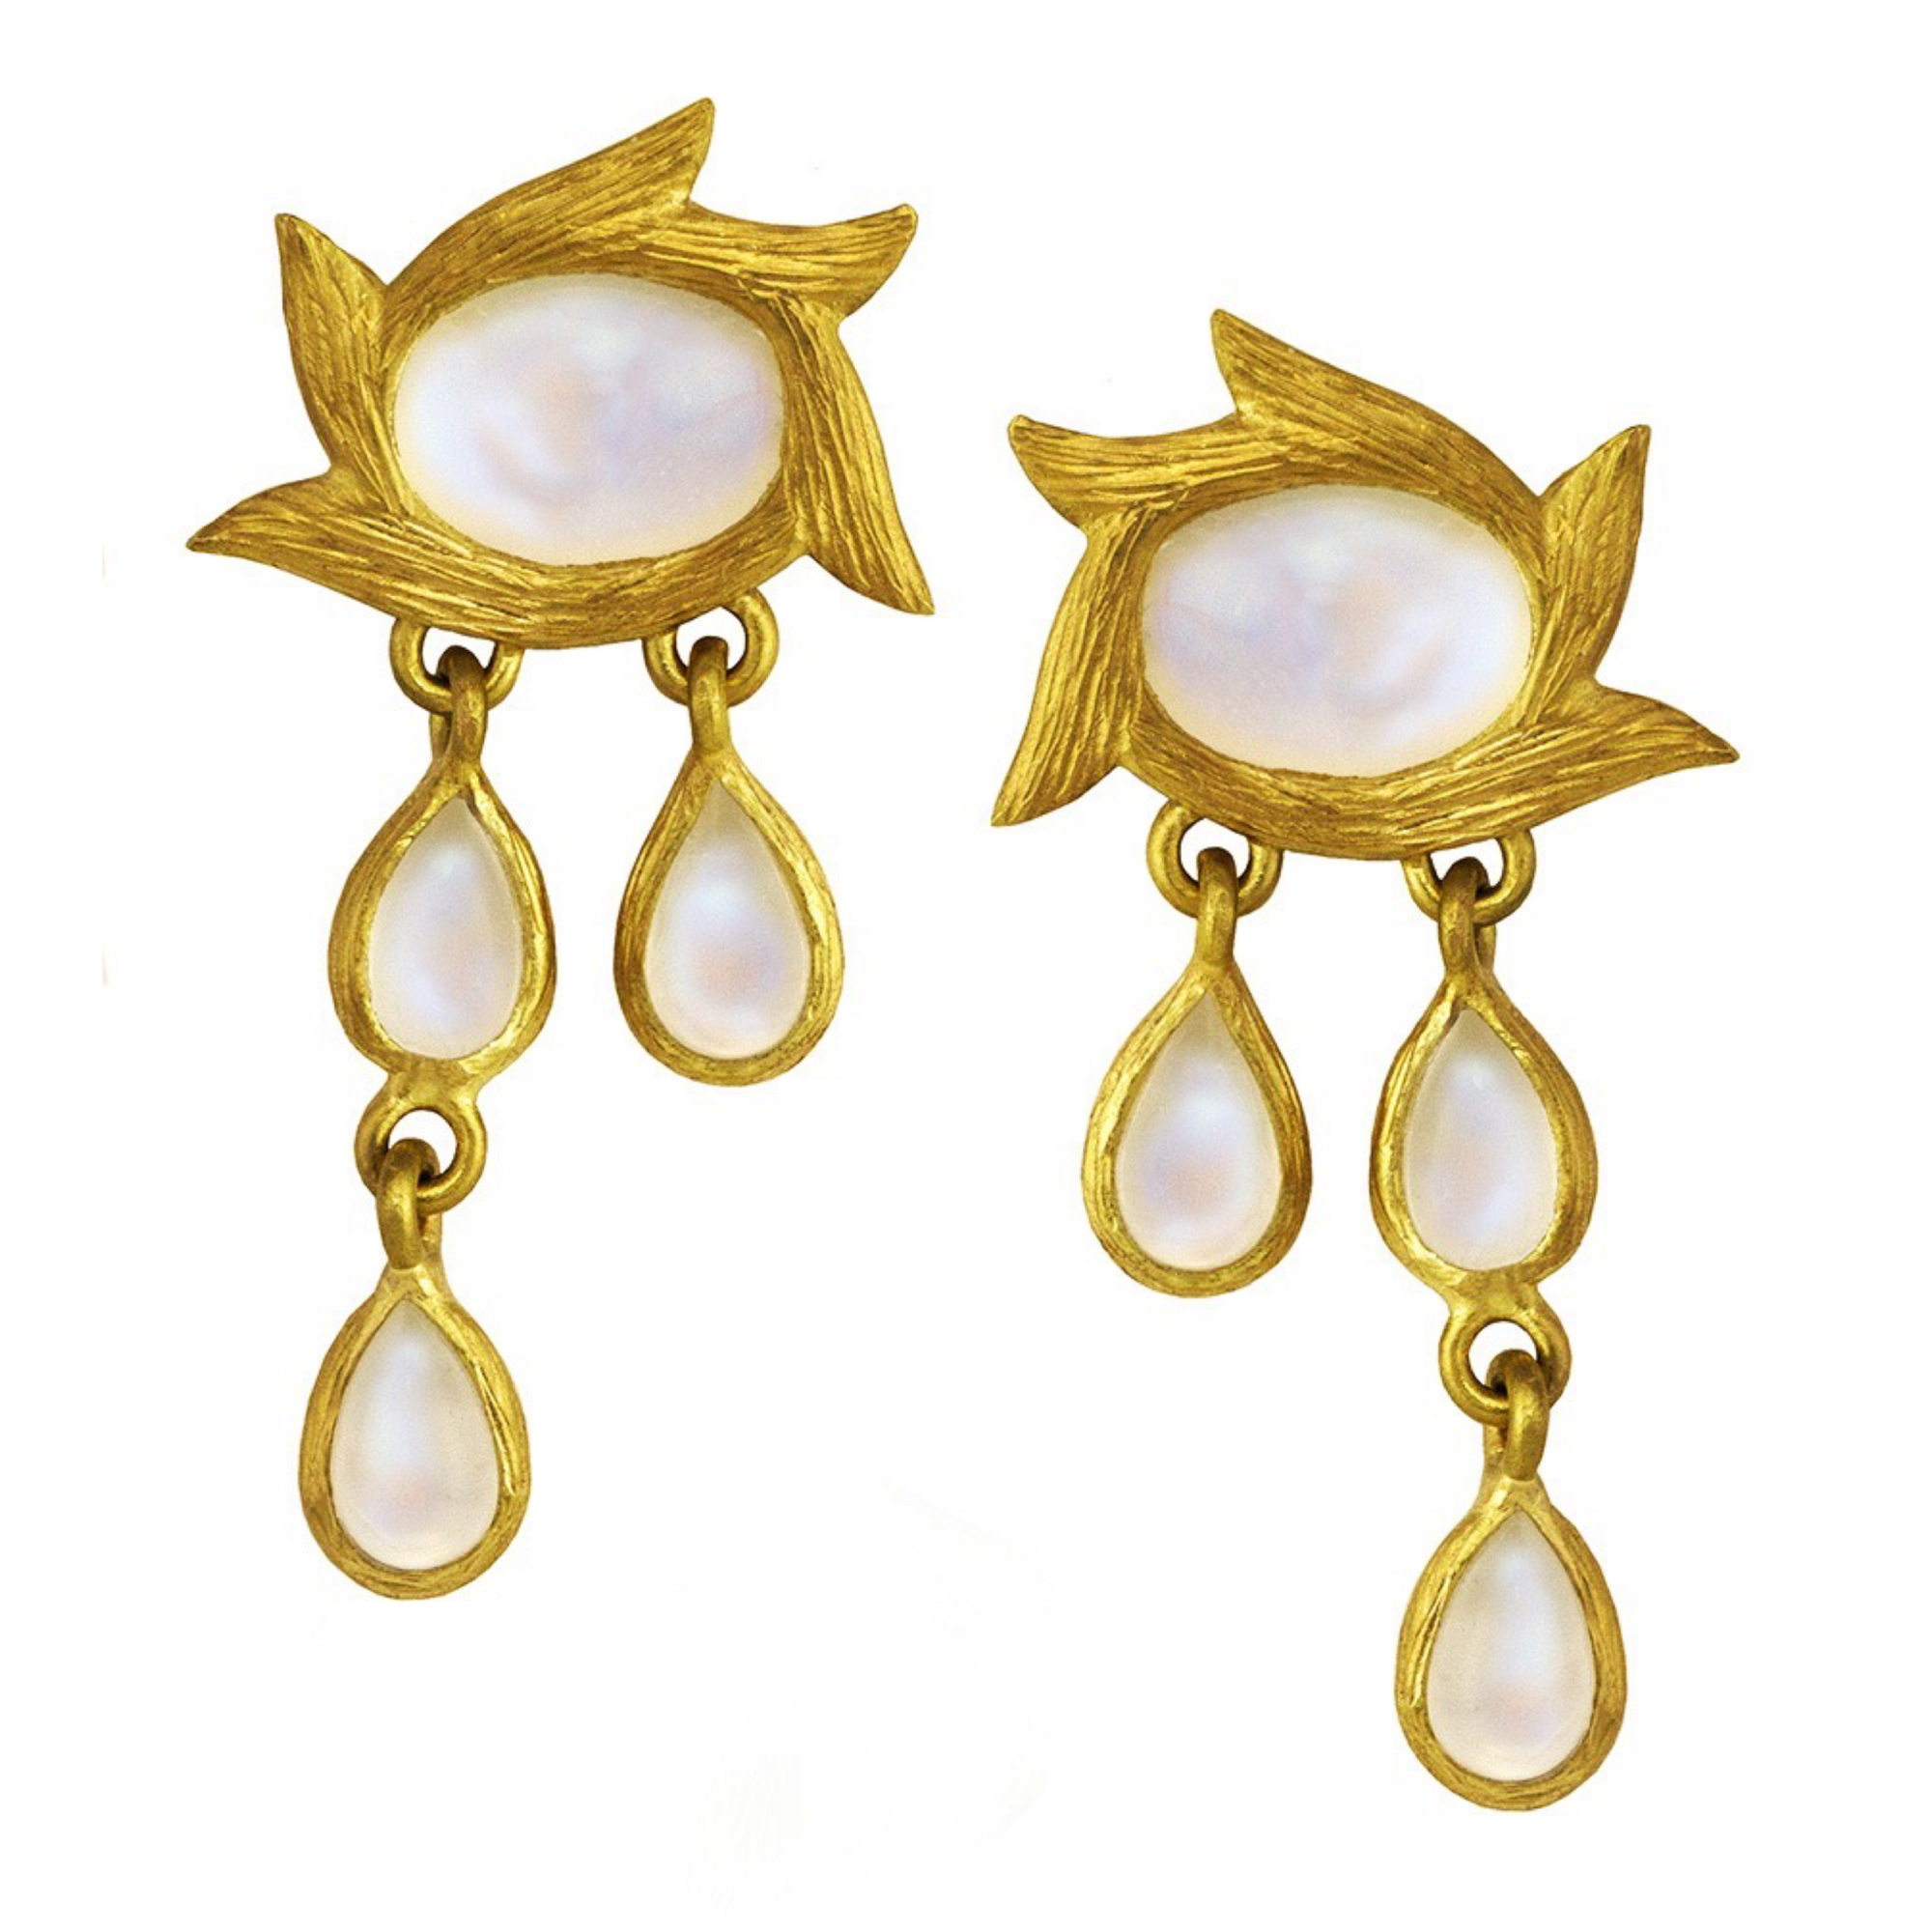 Rainbow Moonstone Star Flower Earrings by Laurie Kaiser available at Talisman Collection Fine Jewelers in El Dorado Hills, CA and online. The Star Flower Earrings are a beautiful blend of modern sophistication and bohemian charm. Three asymmetrical cabochon teardrops gracefully hang from an oval cabochon moonstone framed in 18k yellow gold vines. These earrings are a must-have for any jewelry lover.